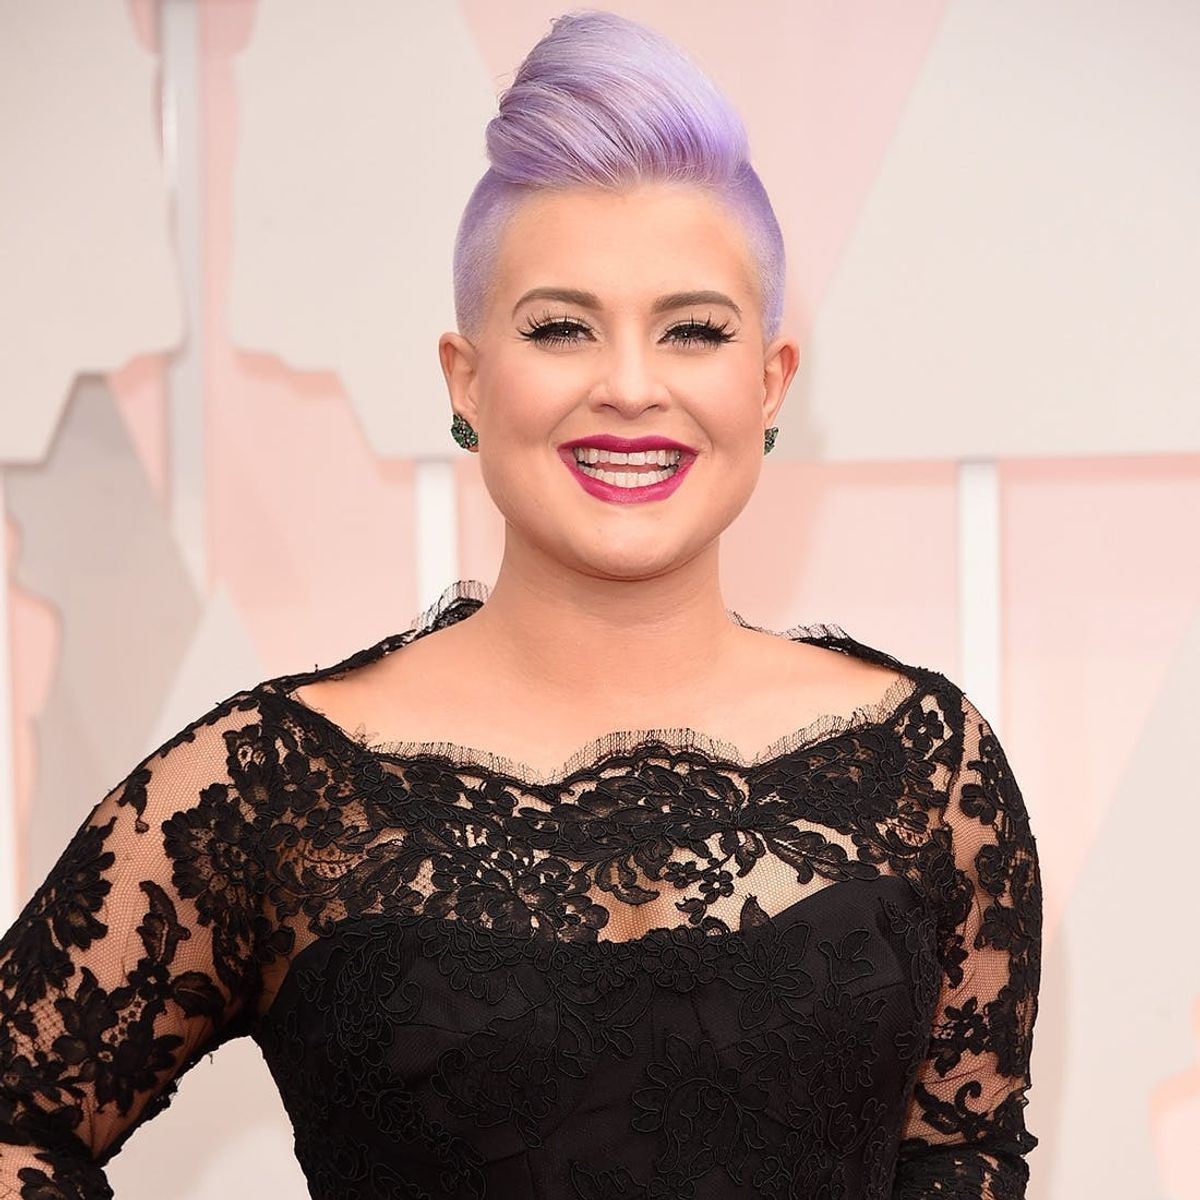 Kelly Osbourne Just Added Some Major Length to Her Hair